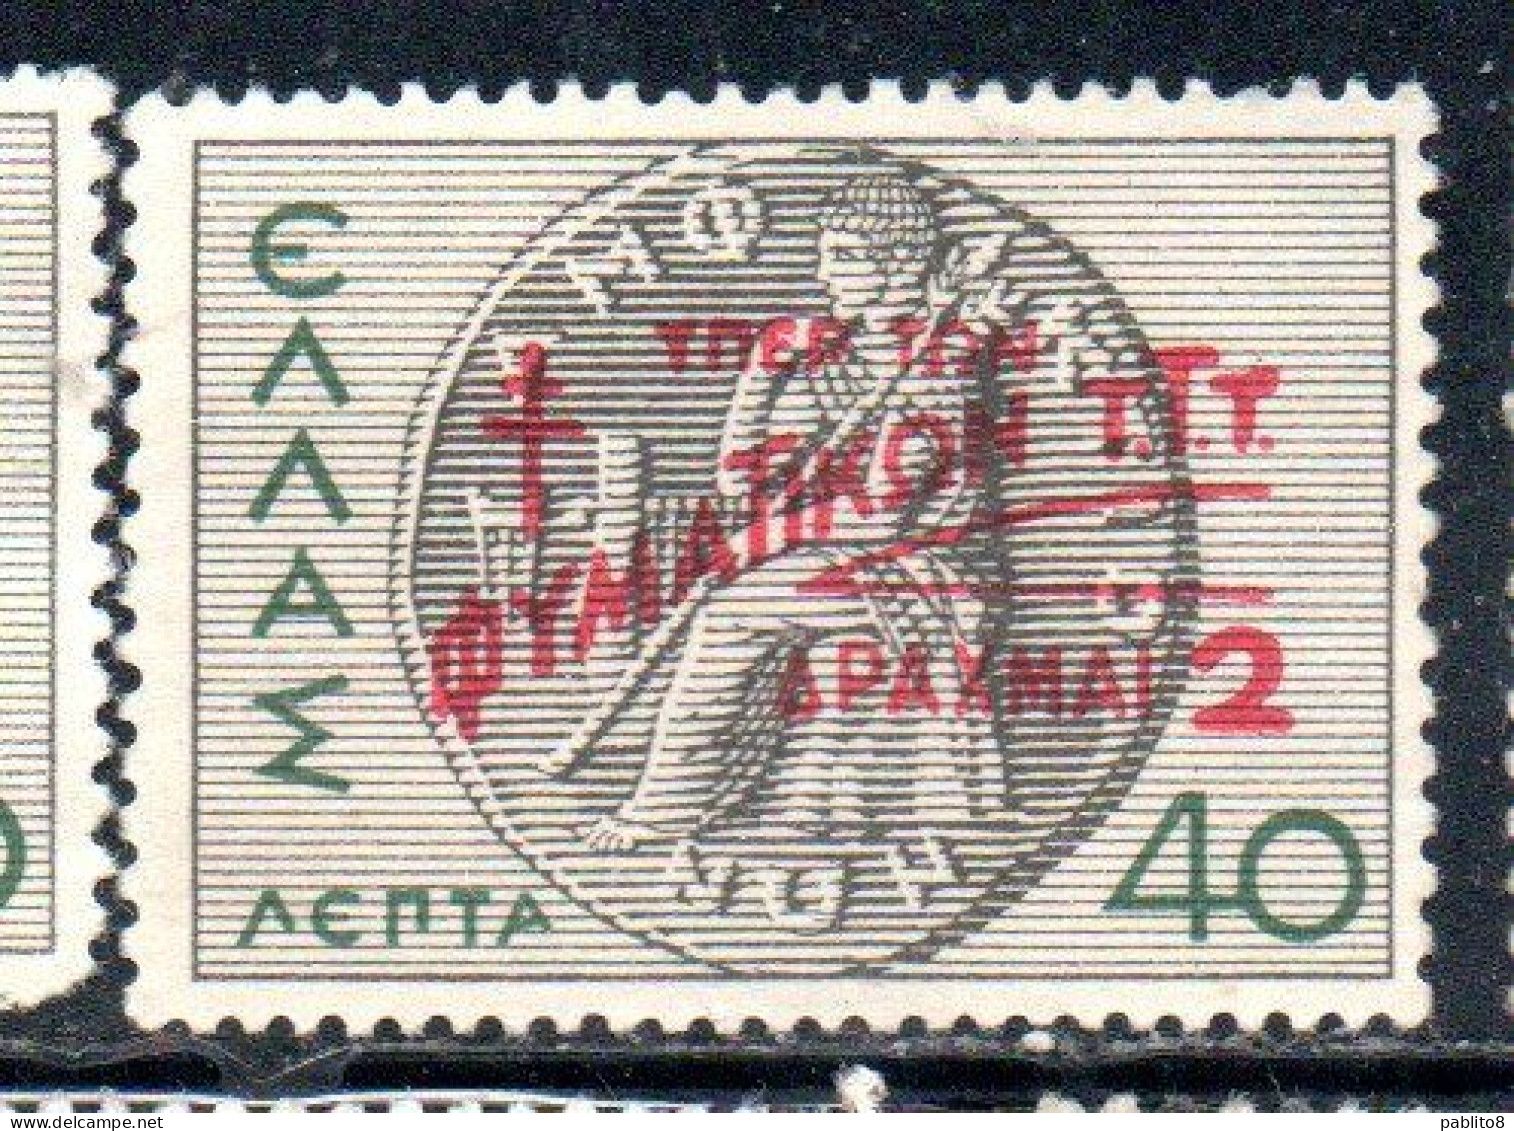 GREECE GRECIA ELLAS 1945 POSTAL TAX STAMPS TUBERCULOSIS SURCHARGED 2d On 40l MH - Nuevos